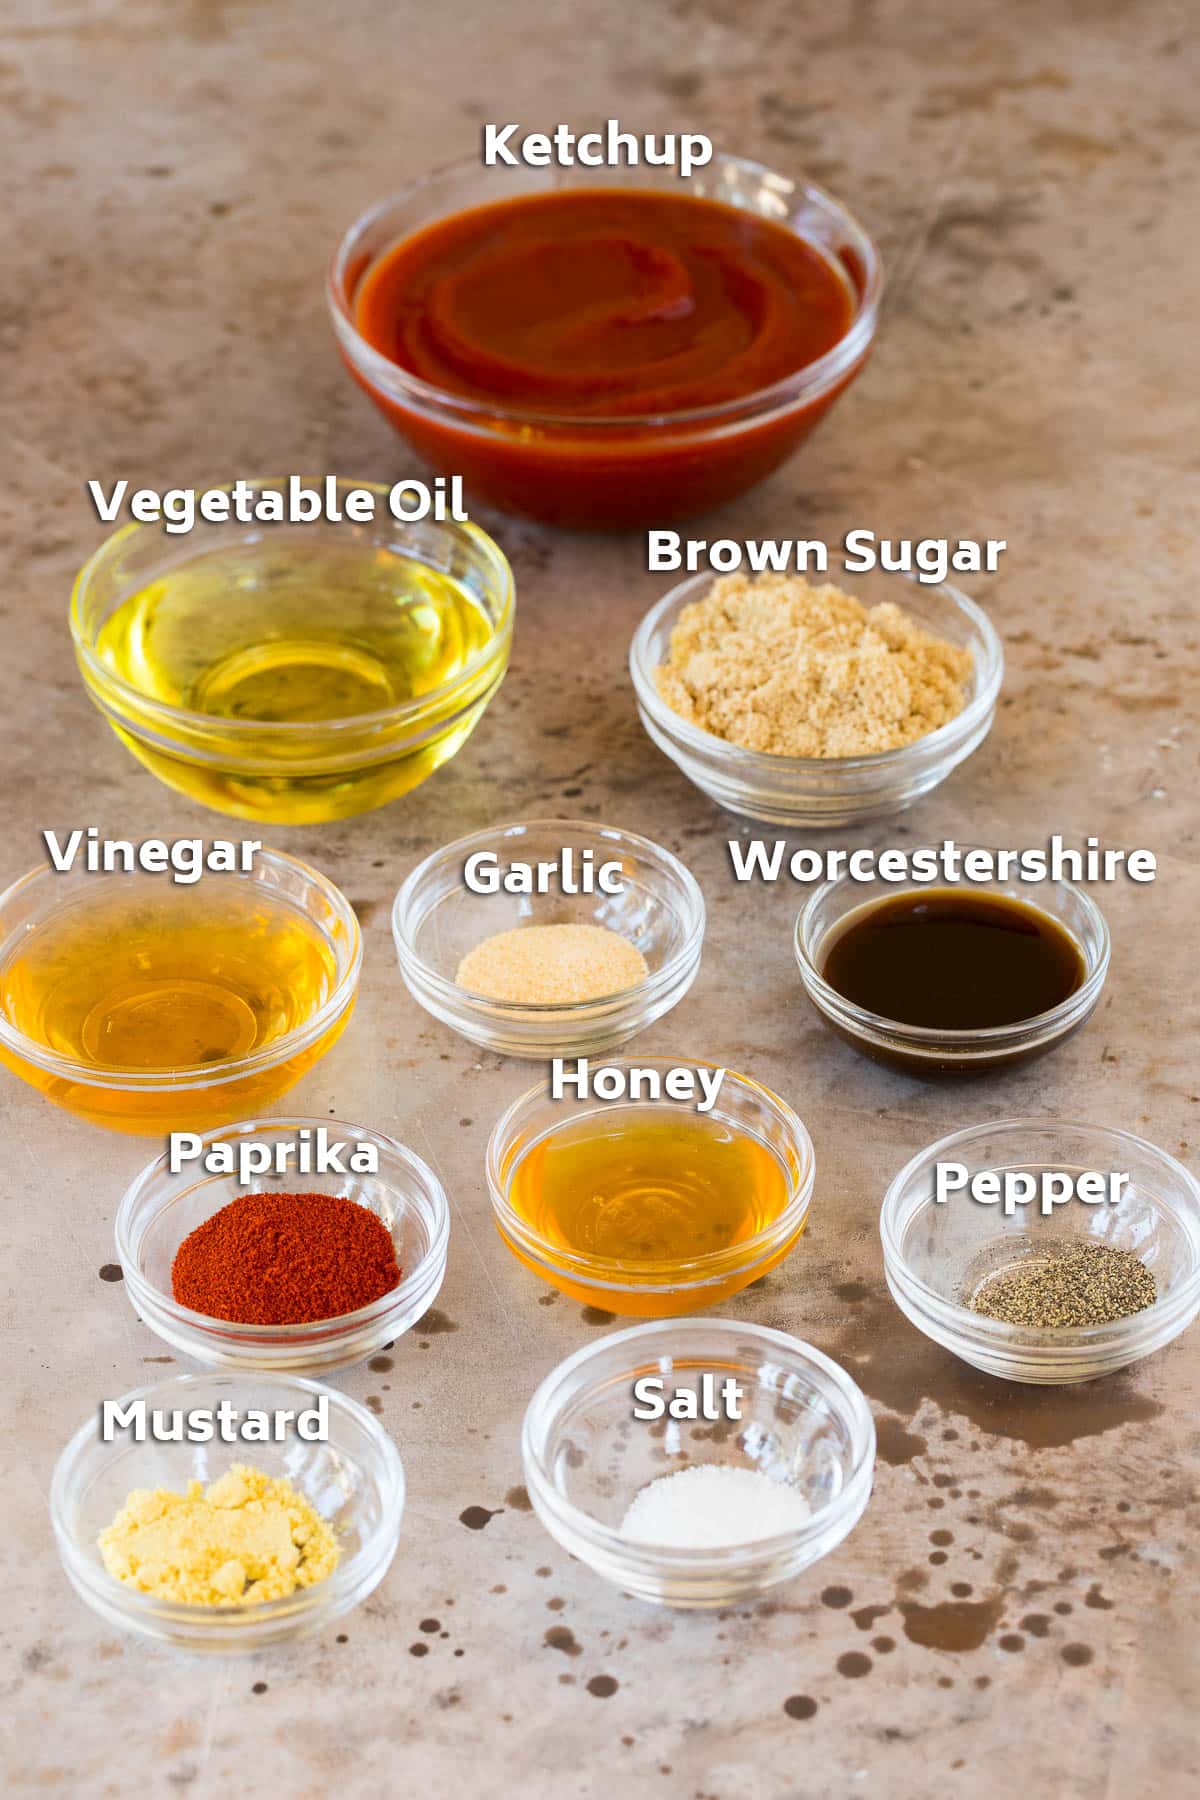 Bowls of ingredients including ketchup, vegetable oil, spices and seasonings.